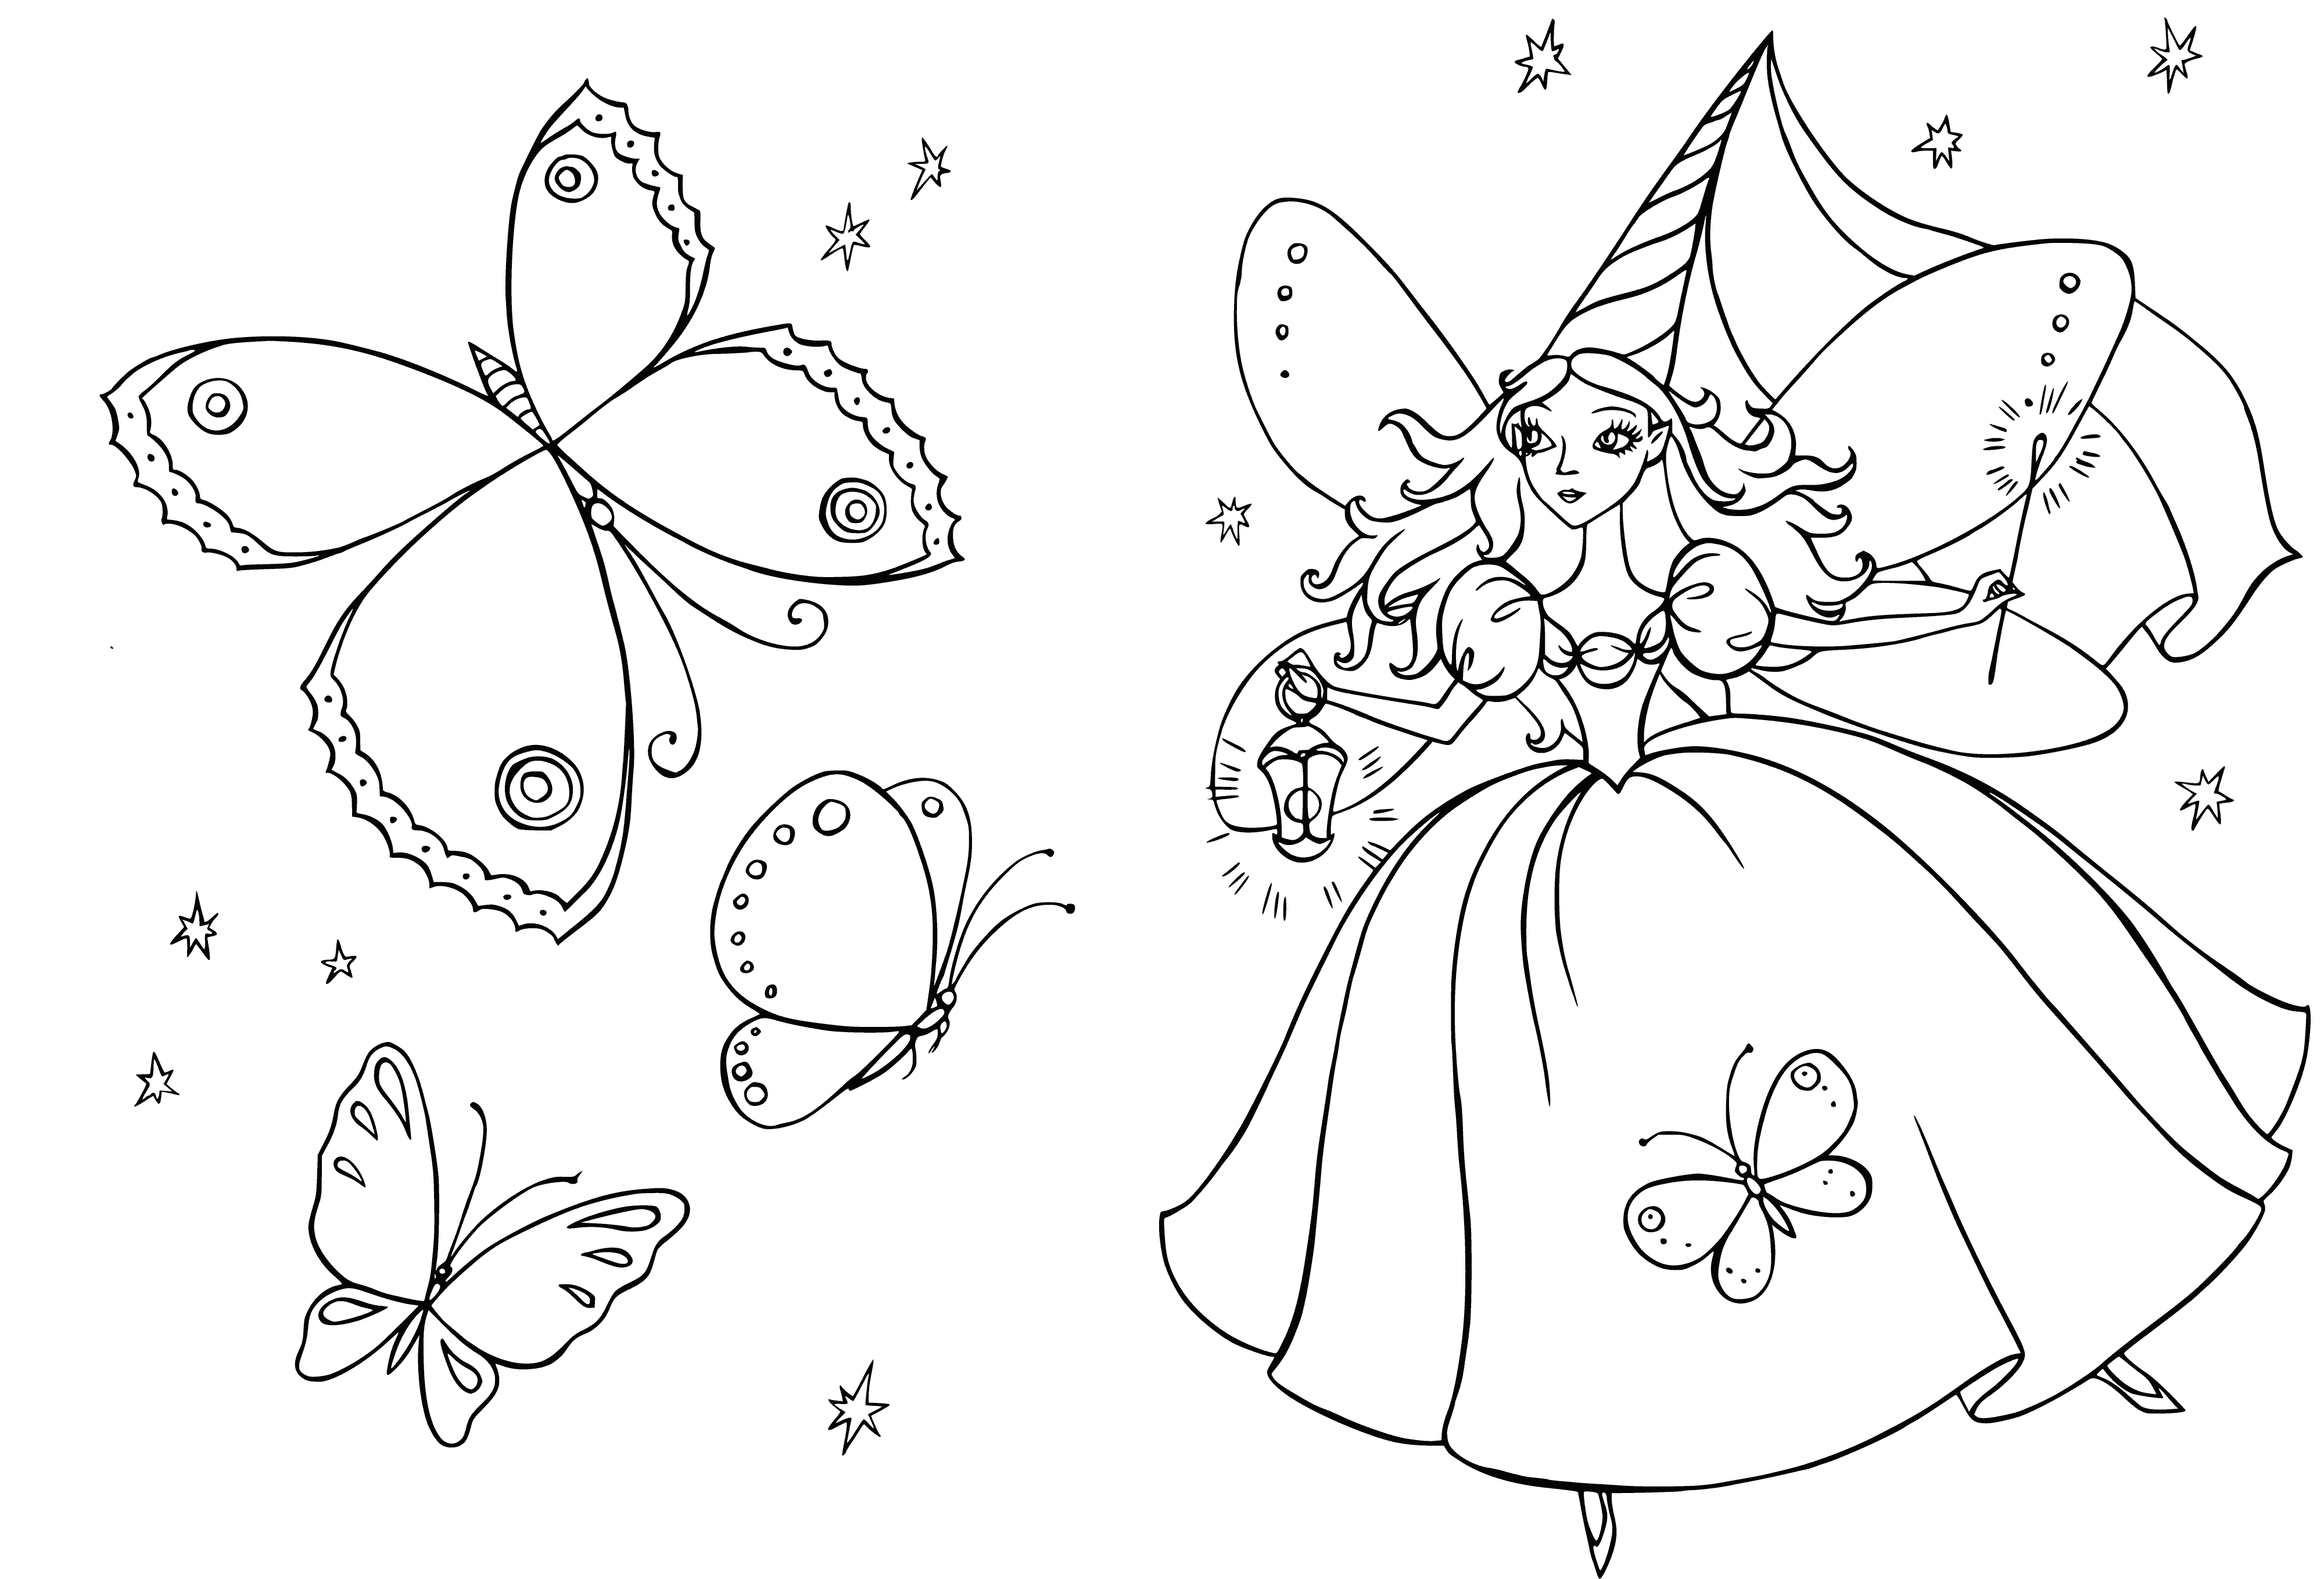 coloring page: Fairy kingdom w/sparkly palace, colorful trees, flowers & fairies flying, rainbow in sky—magical!